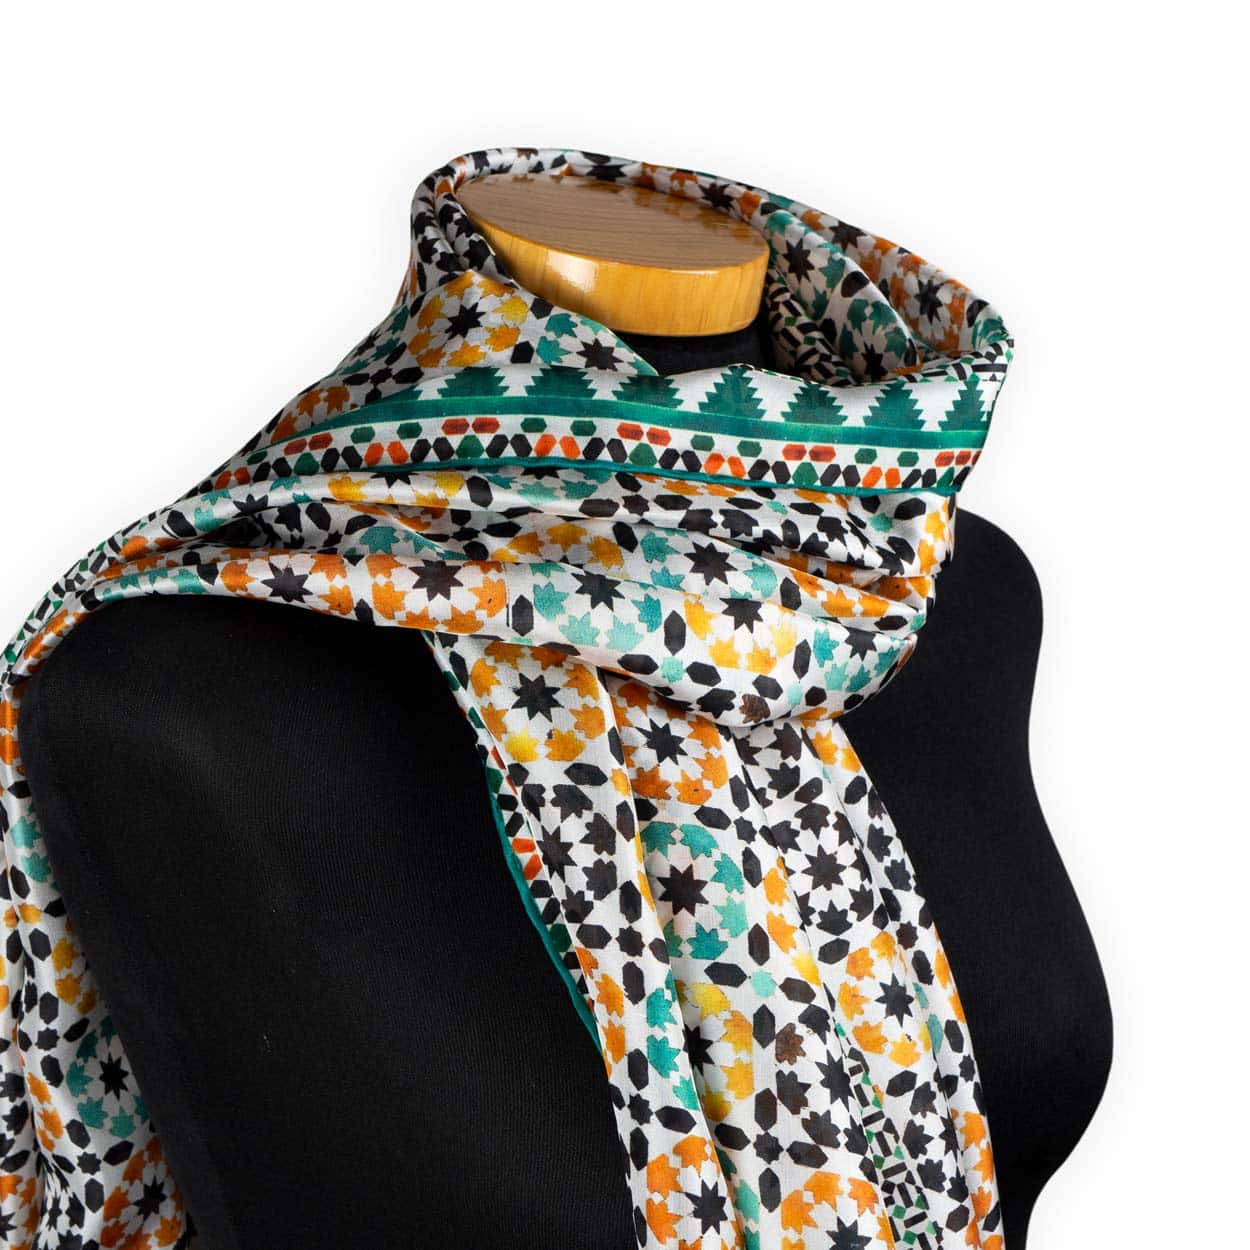 Green silk scarf with orange shades inspired by the Alhambra Palace